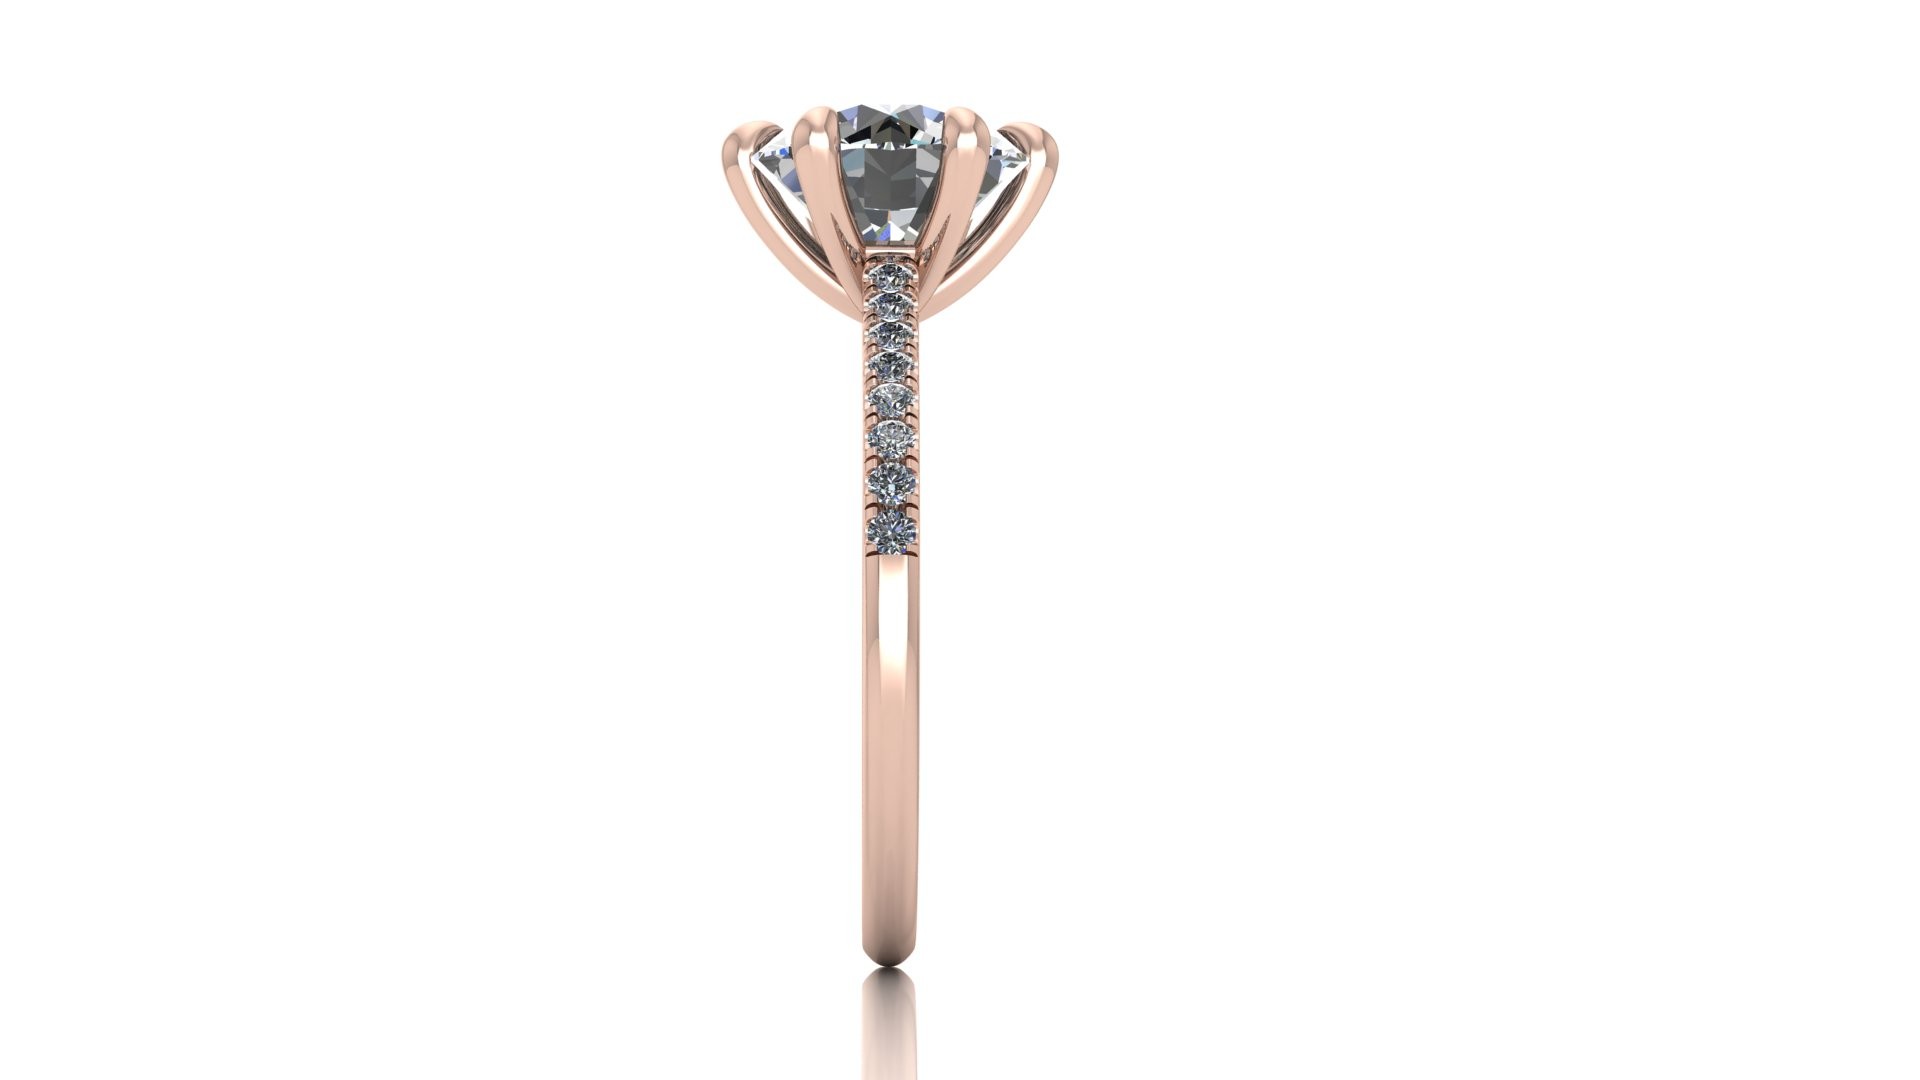 18k rose gold 2,00 ct 6 prongs round cut diamond engagement ring with whisper thin pavÉ set band